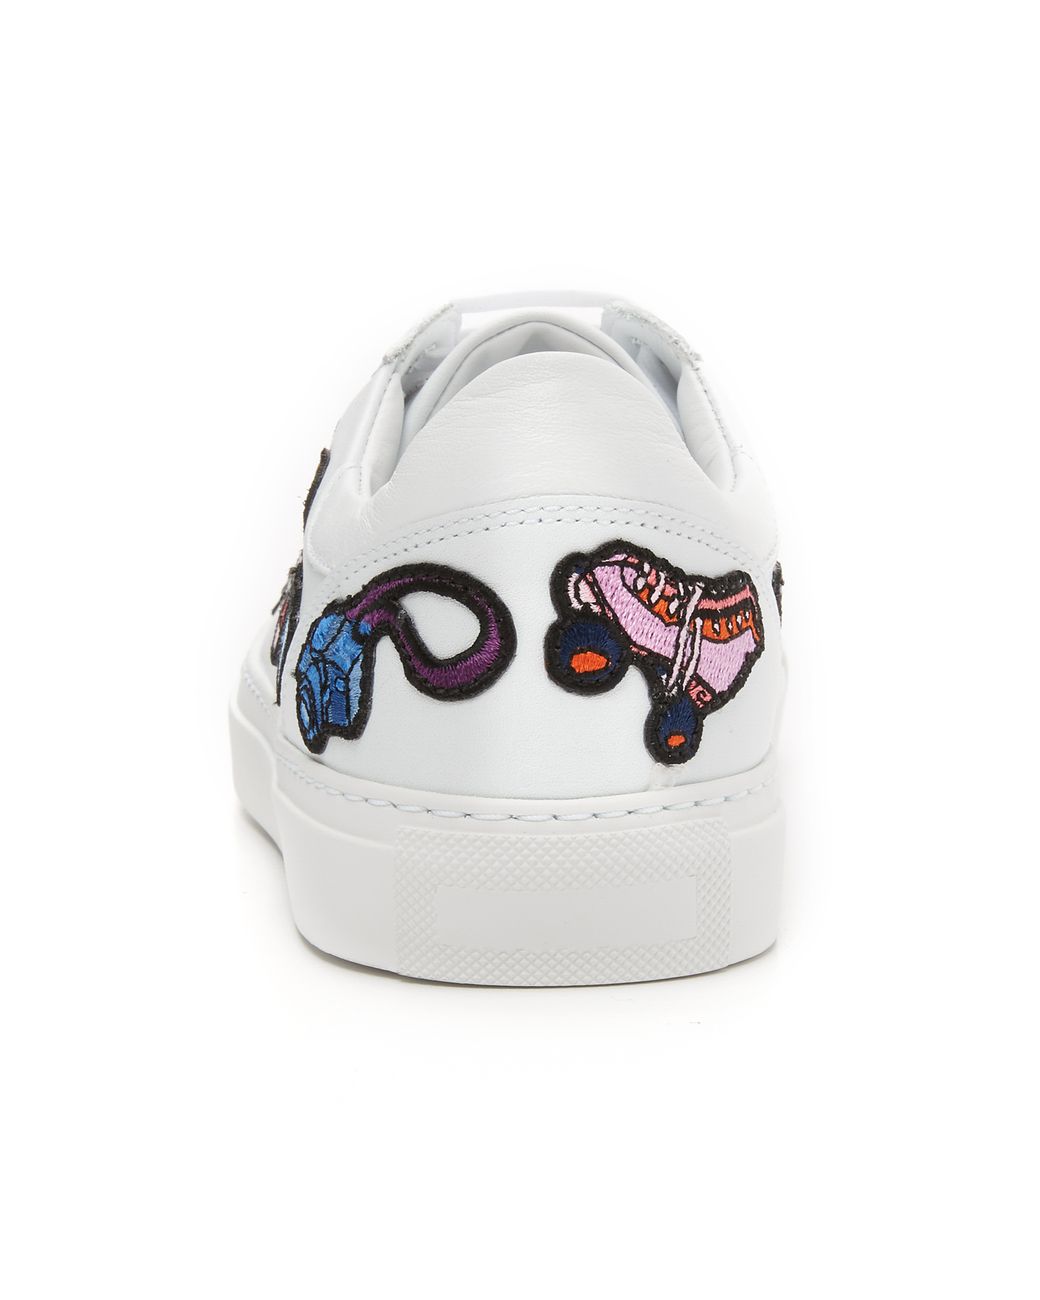 Mira Mikati All Over Patches Sneakers in White | Lyst